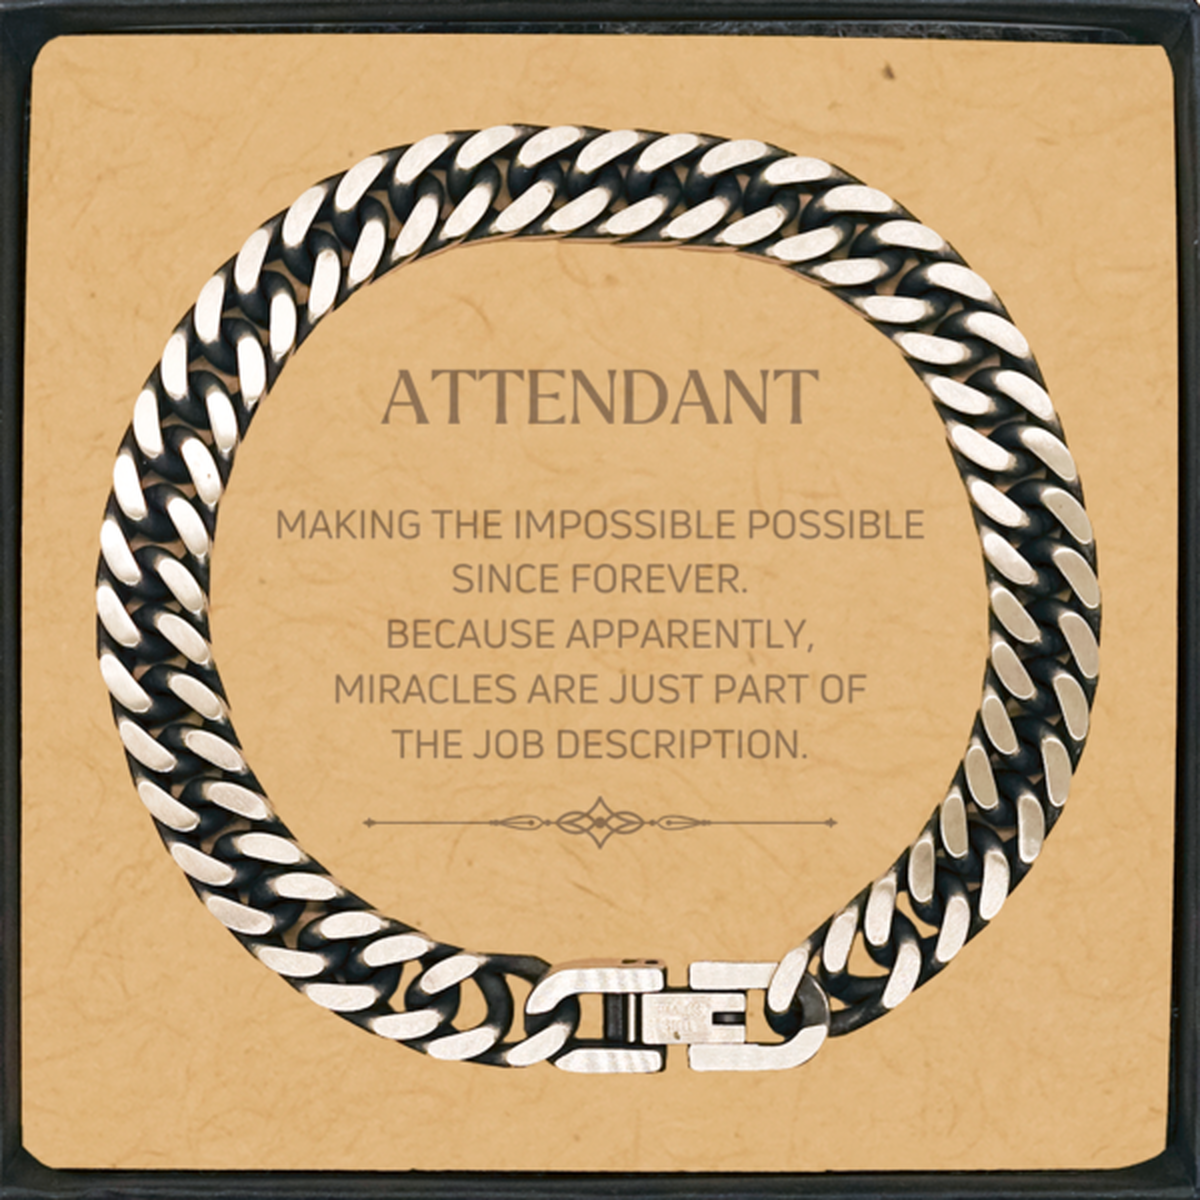 Funny Attendant Gifts, Miracles are just part of the job description, Inspirational Birthday Cuban Link Chain Bracelet For Attendant, Men, Women, Coworkers, Friends, Boss